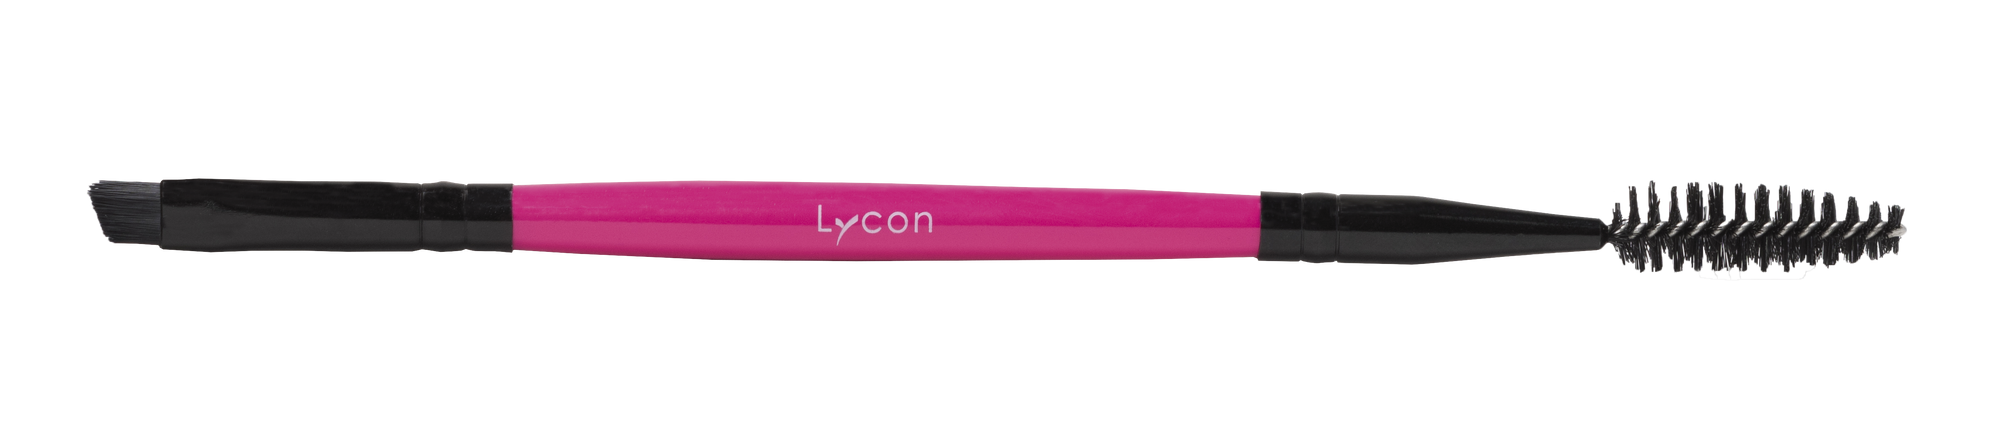 Lycon Dual ended Eyebrow Brush